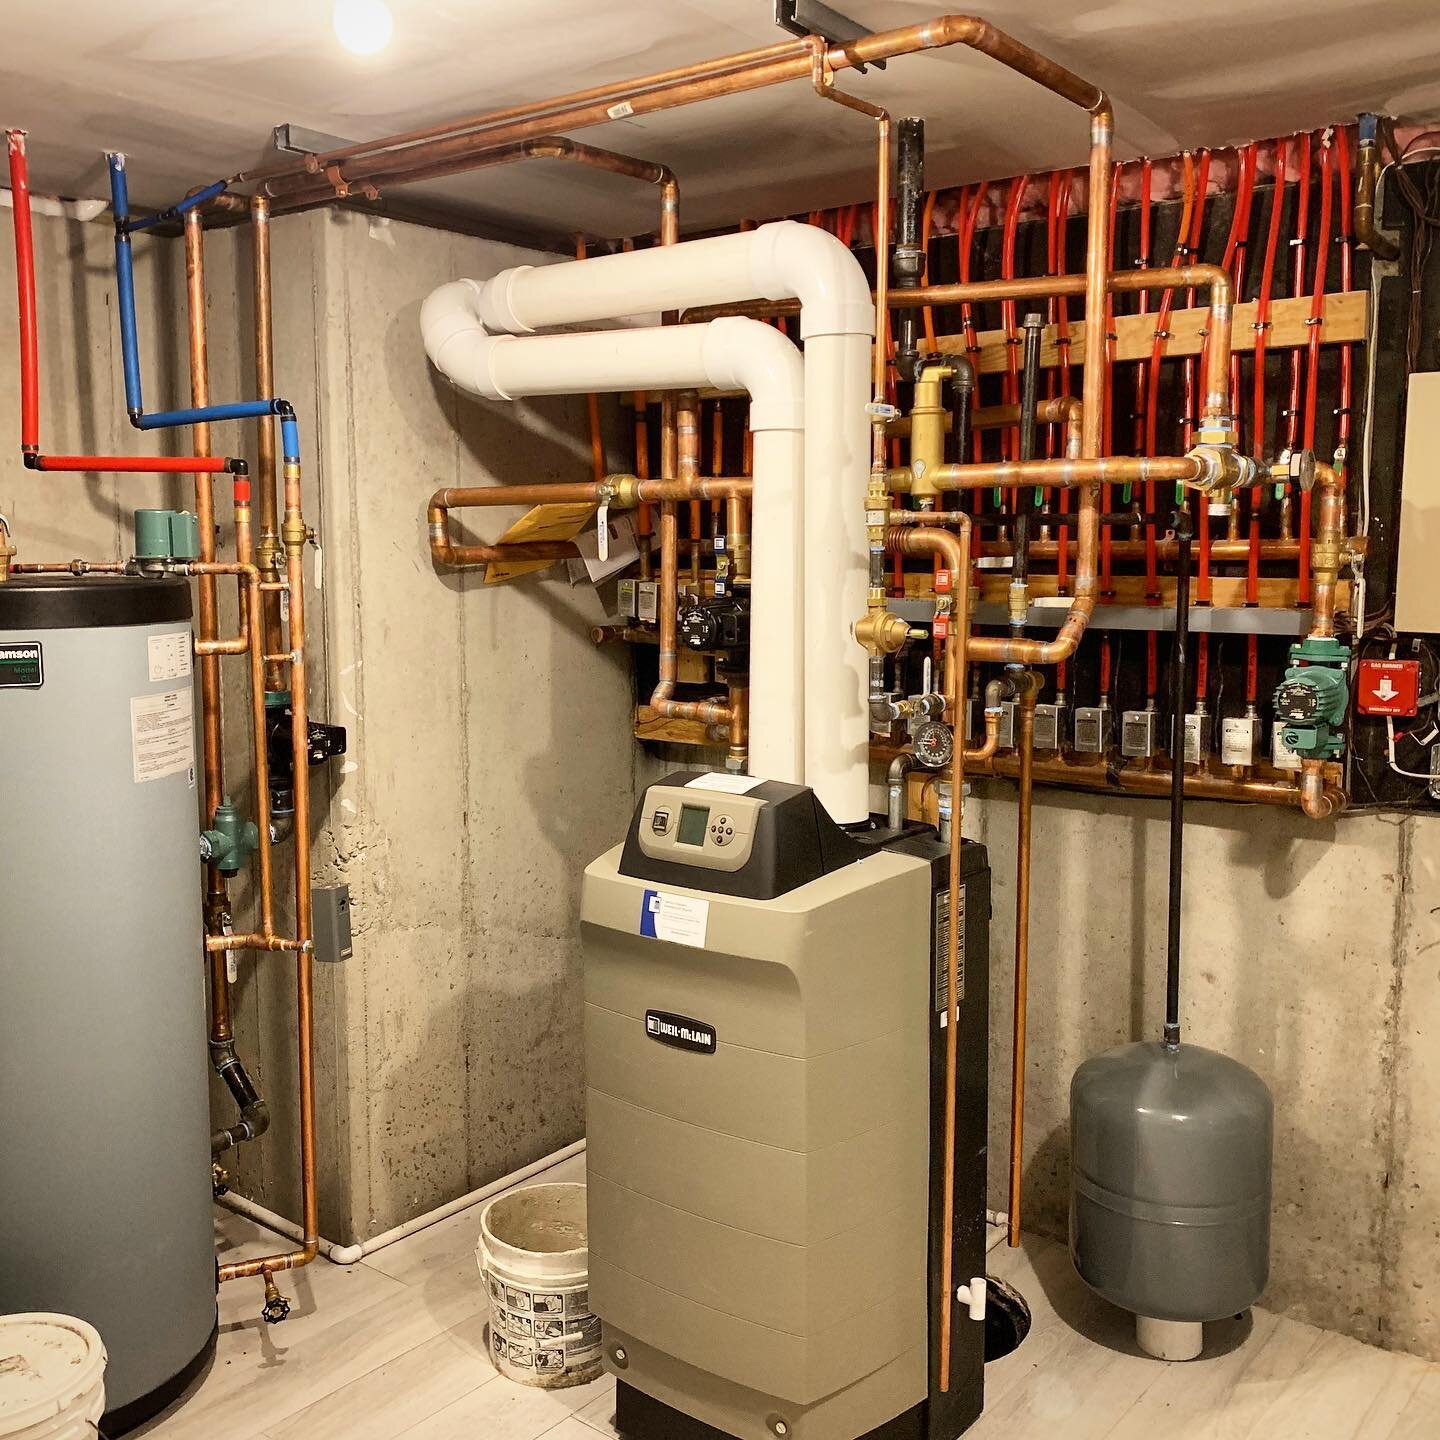 With proper maintenance and service we can keep your heating system running smoothly and efficiently this season. &bull;We have over 30 years of heating system experience and serve the Bergen and Hudson County areas of N.J. &bull;Call  201-329-9444 f